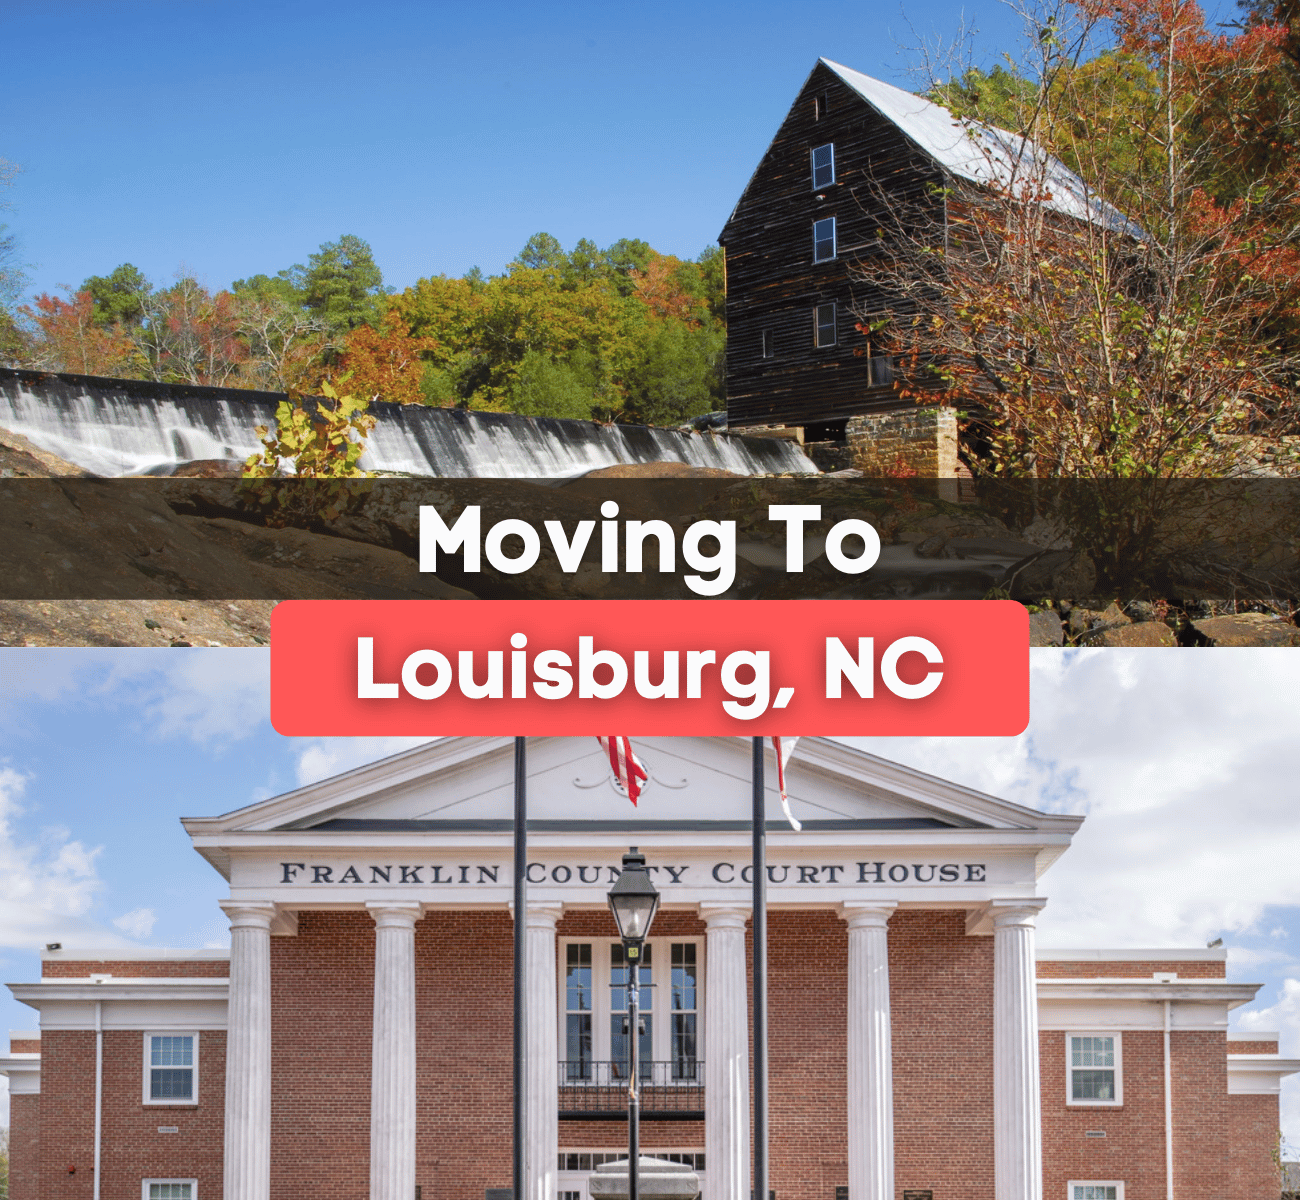 moving to Louisburg, NC - Franklin County Courthouse